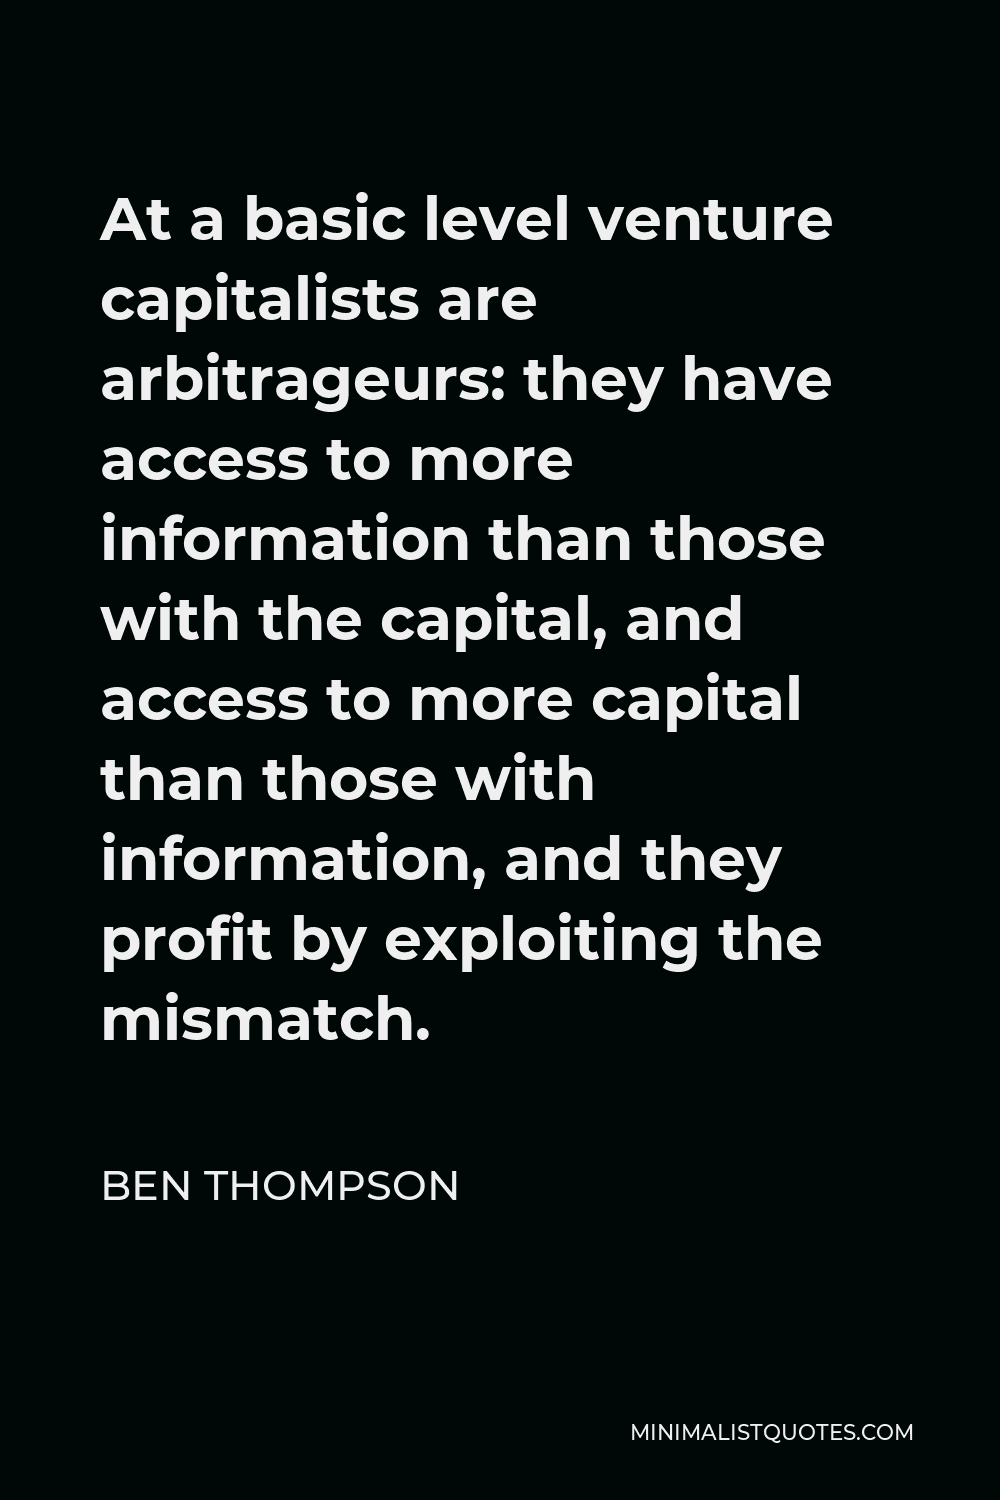 Ben Thompson Quote - At a basic level venture capitalists are arbitrageurs: they have access to more information than those with the capital, and access to more capital than those with information, and they profit by exploiting the mismatch.